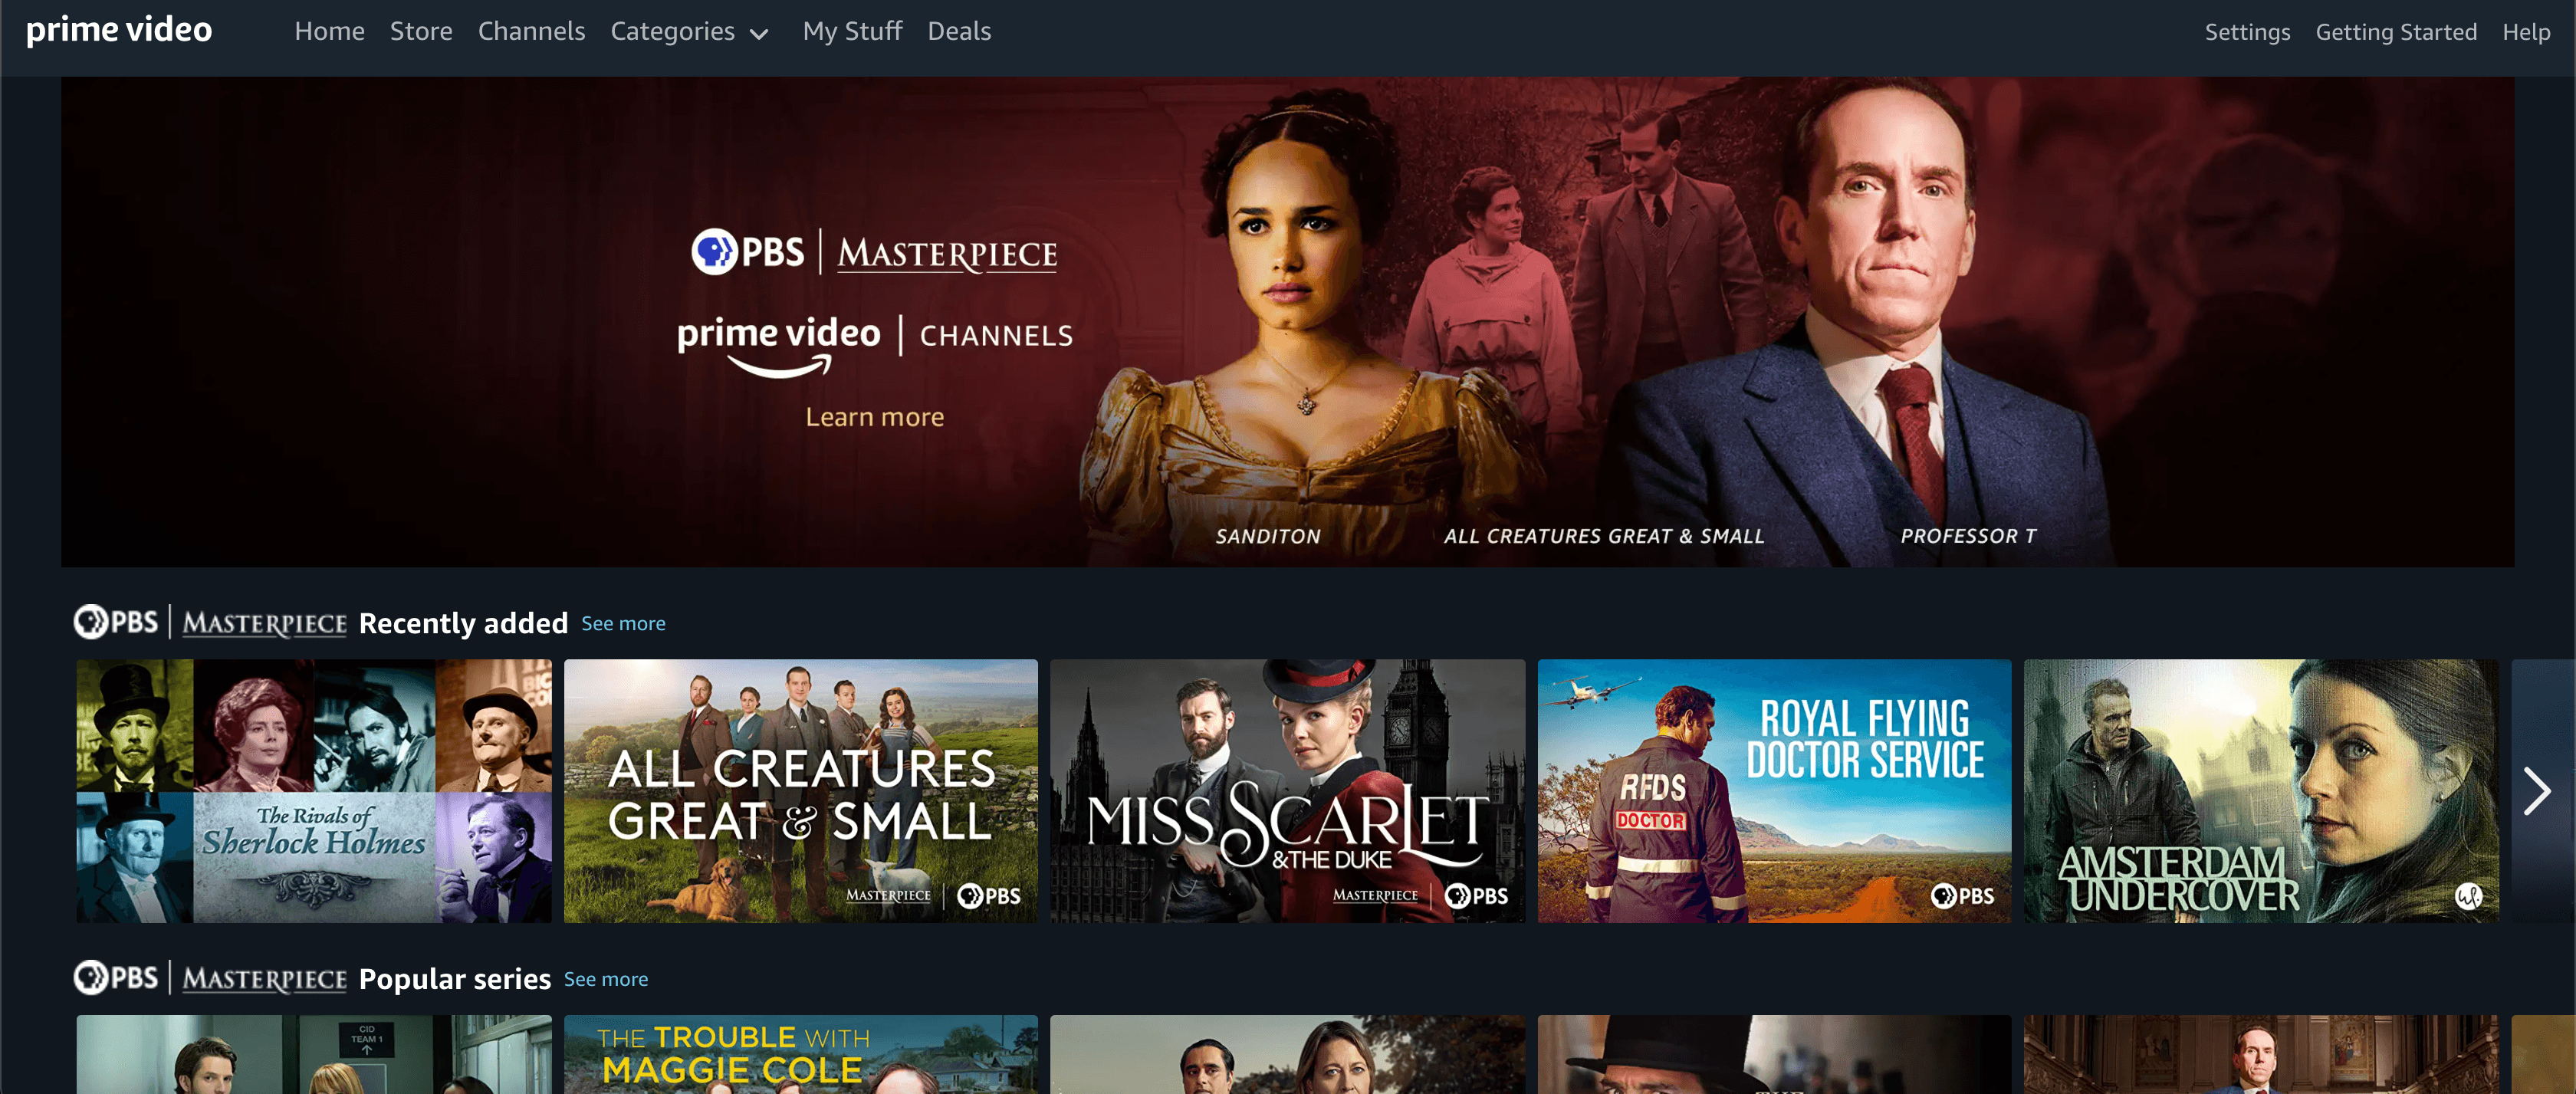 Get PBS Masterpiece Prime Video Channel for Just 99 Cents for Two Months